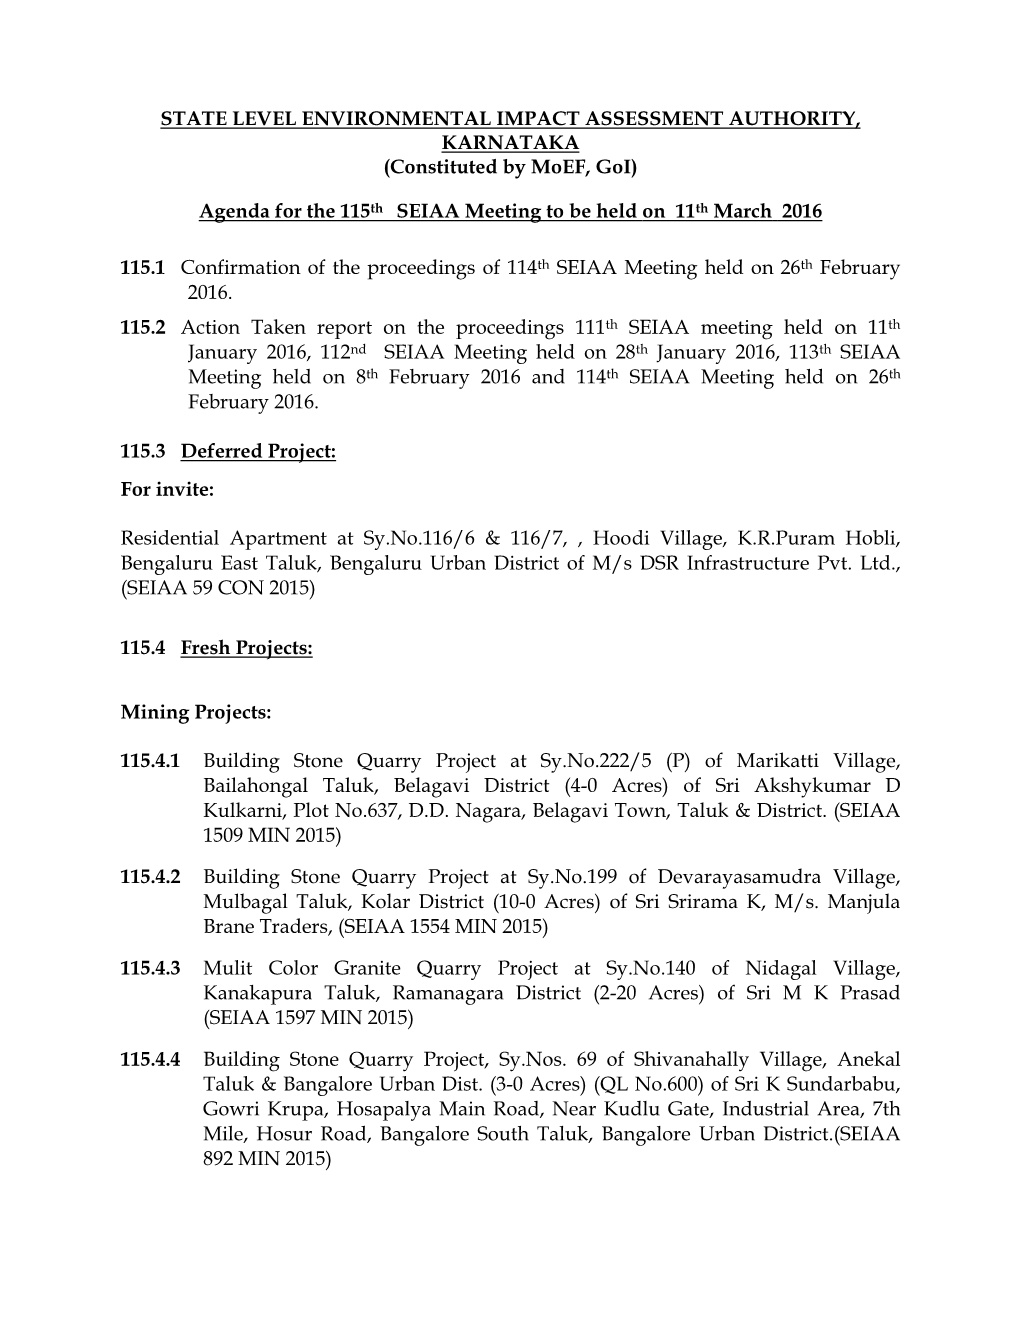 Agenda for the 115Th SEIAA Meeting to Be Held on 11 Th March 2016